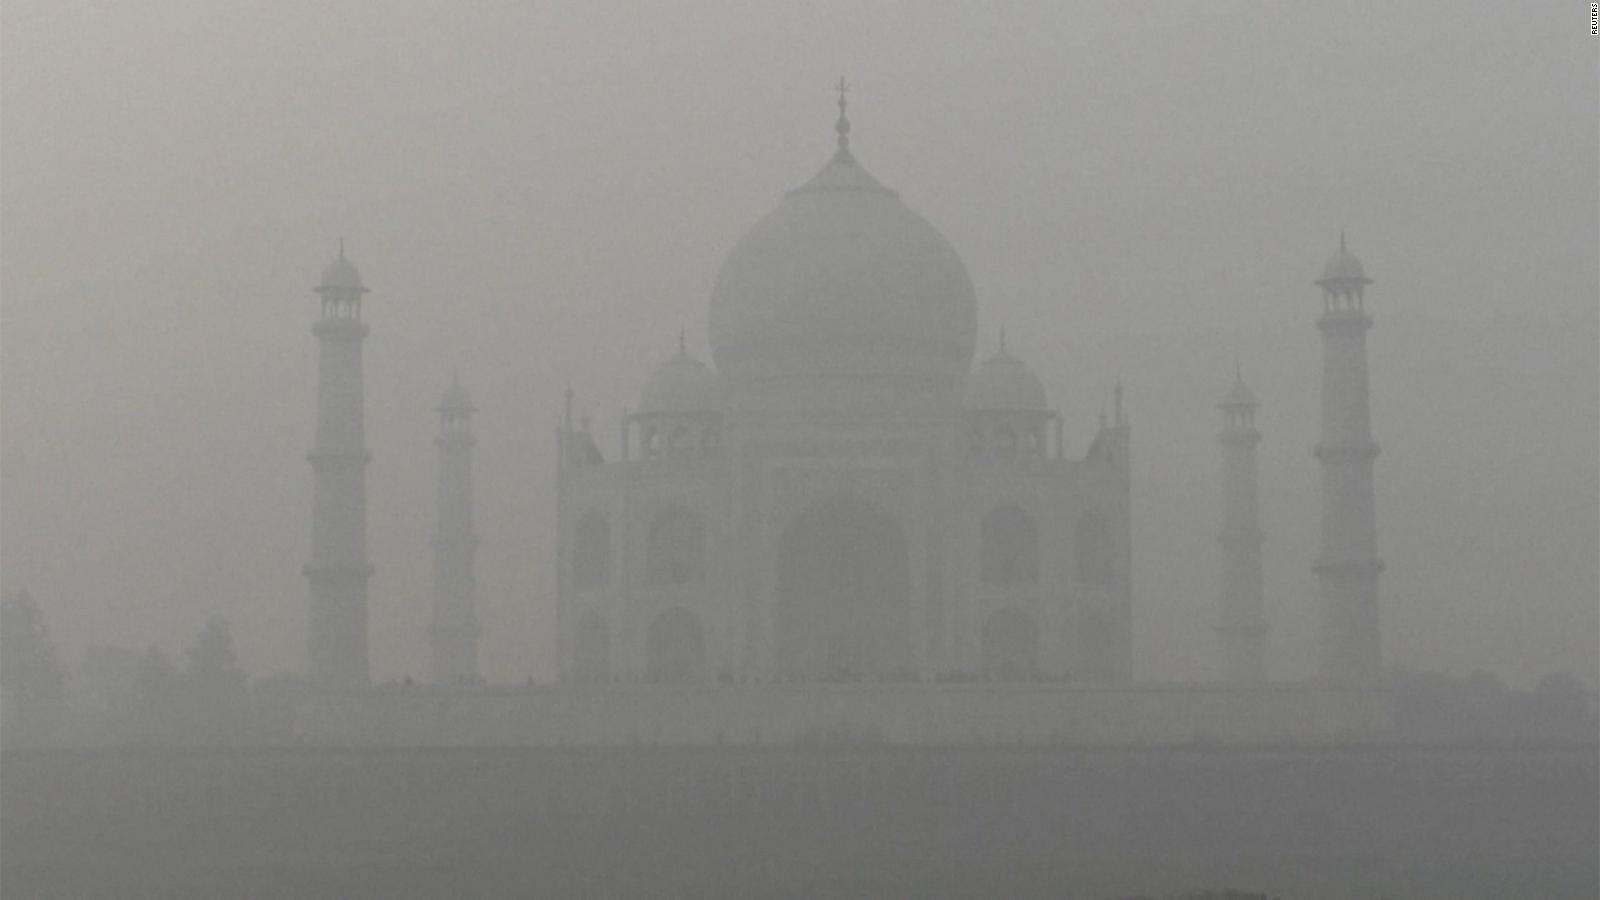 Pictures show the Taj Mahal getting polluted